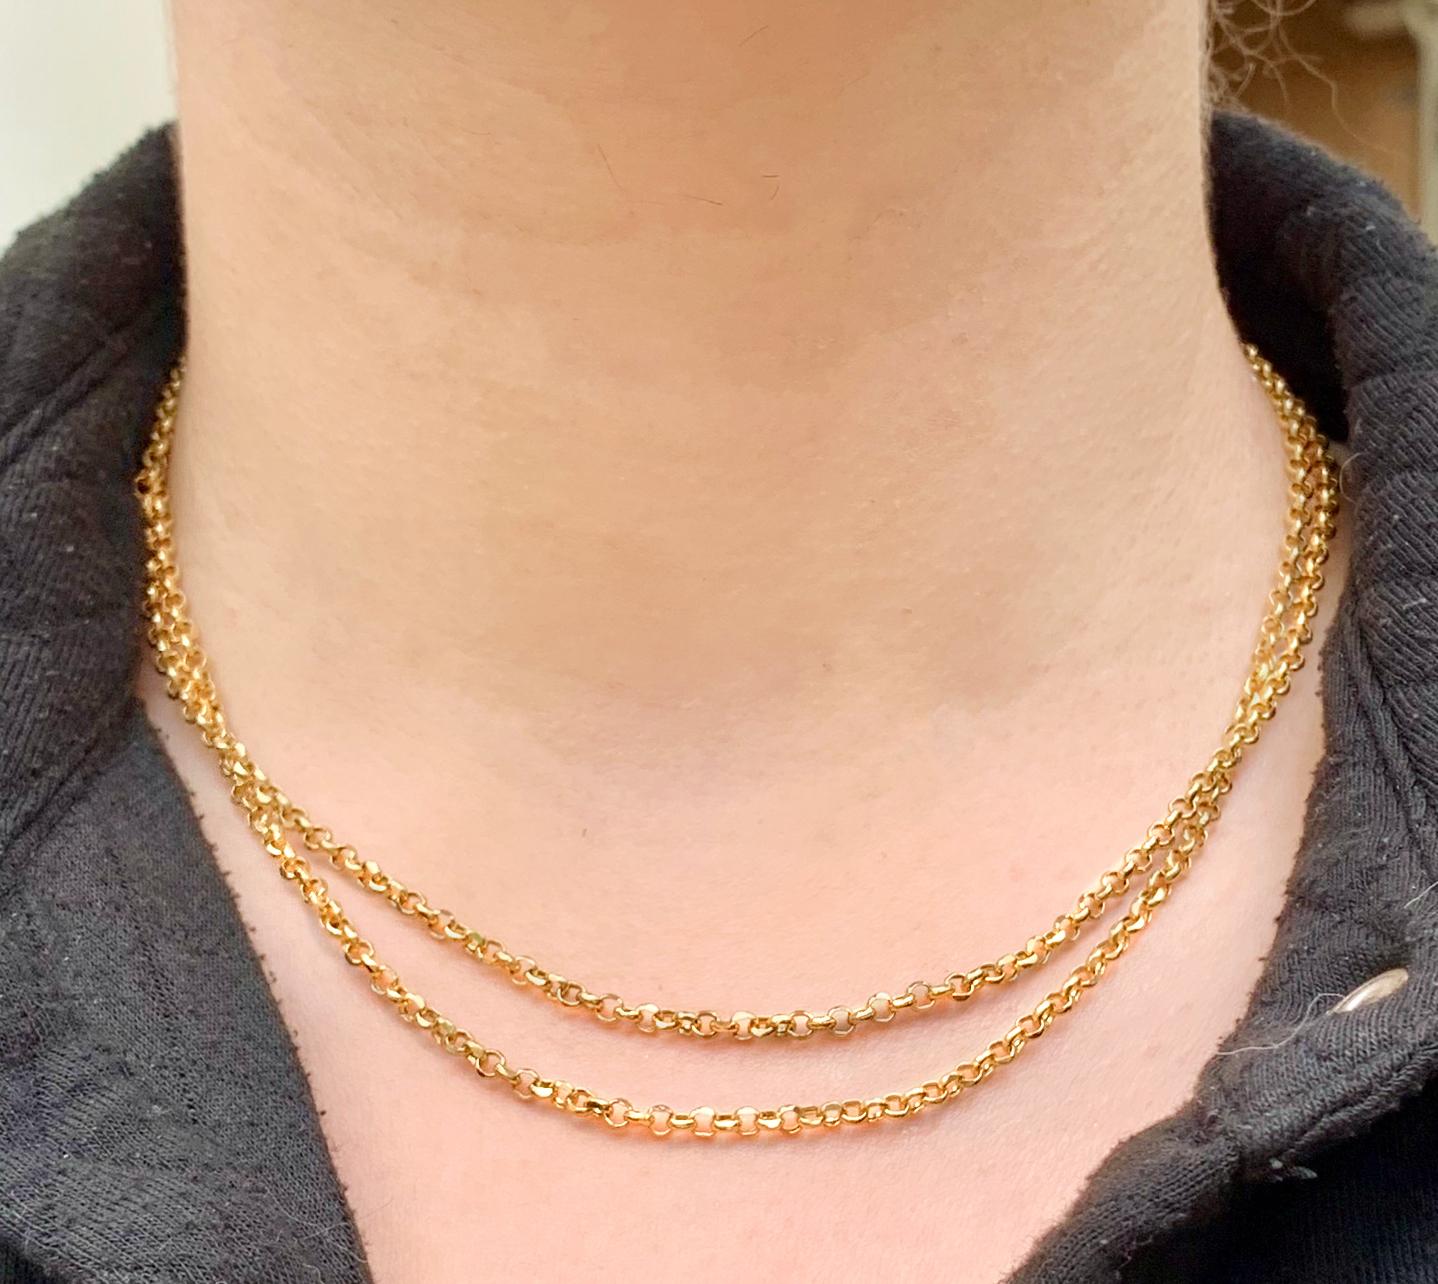 This is our most popular luxury chain!
A longer 88 cm (34.6